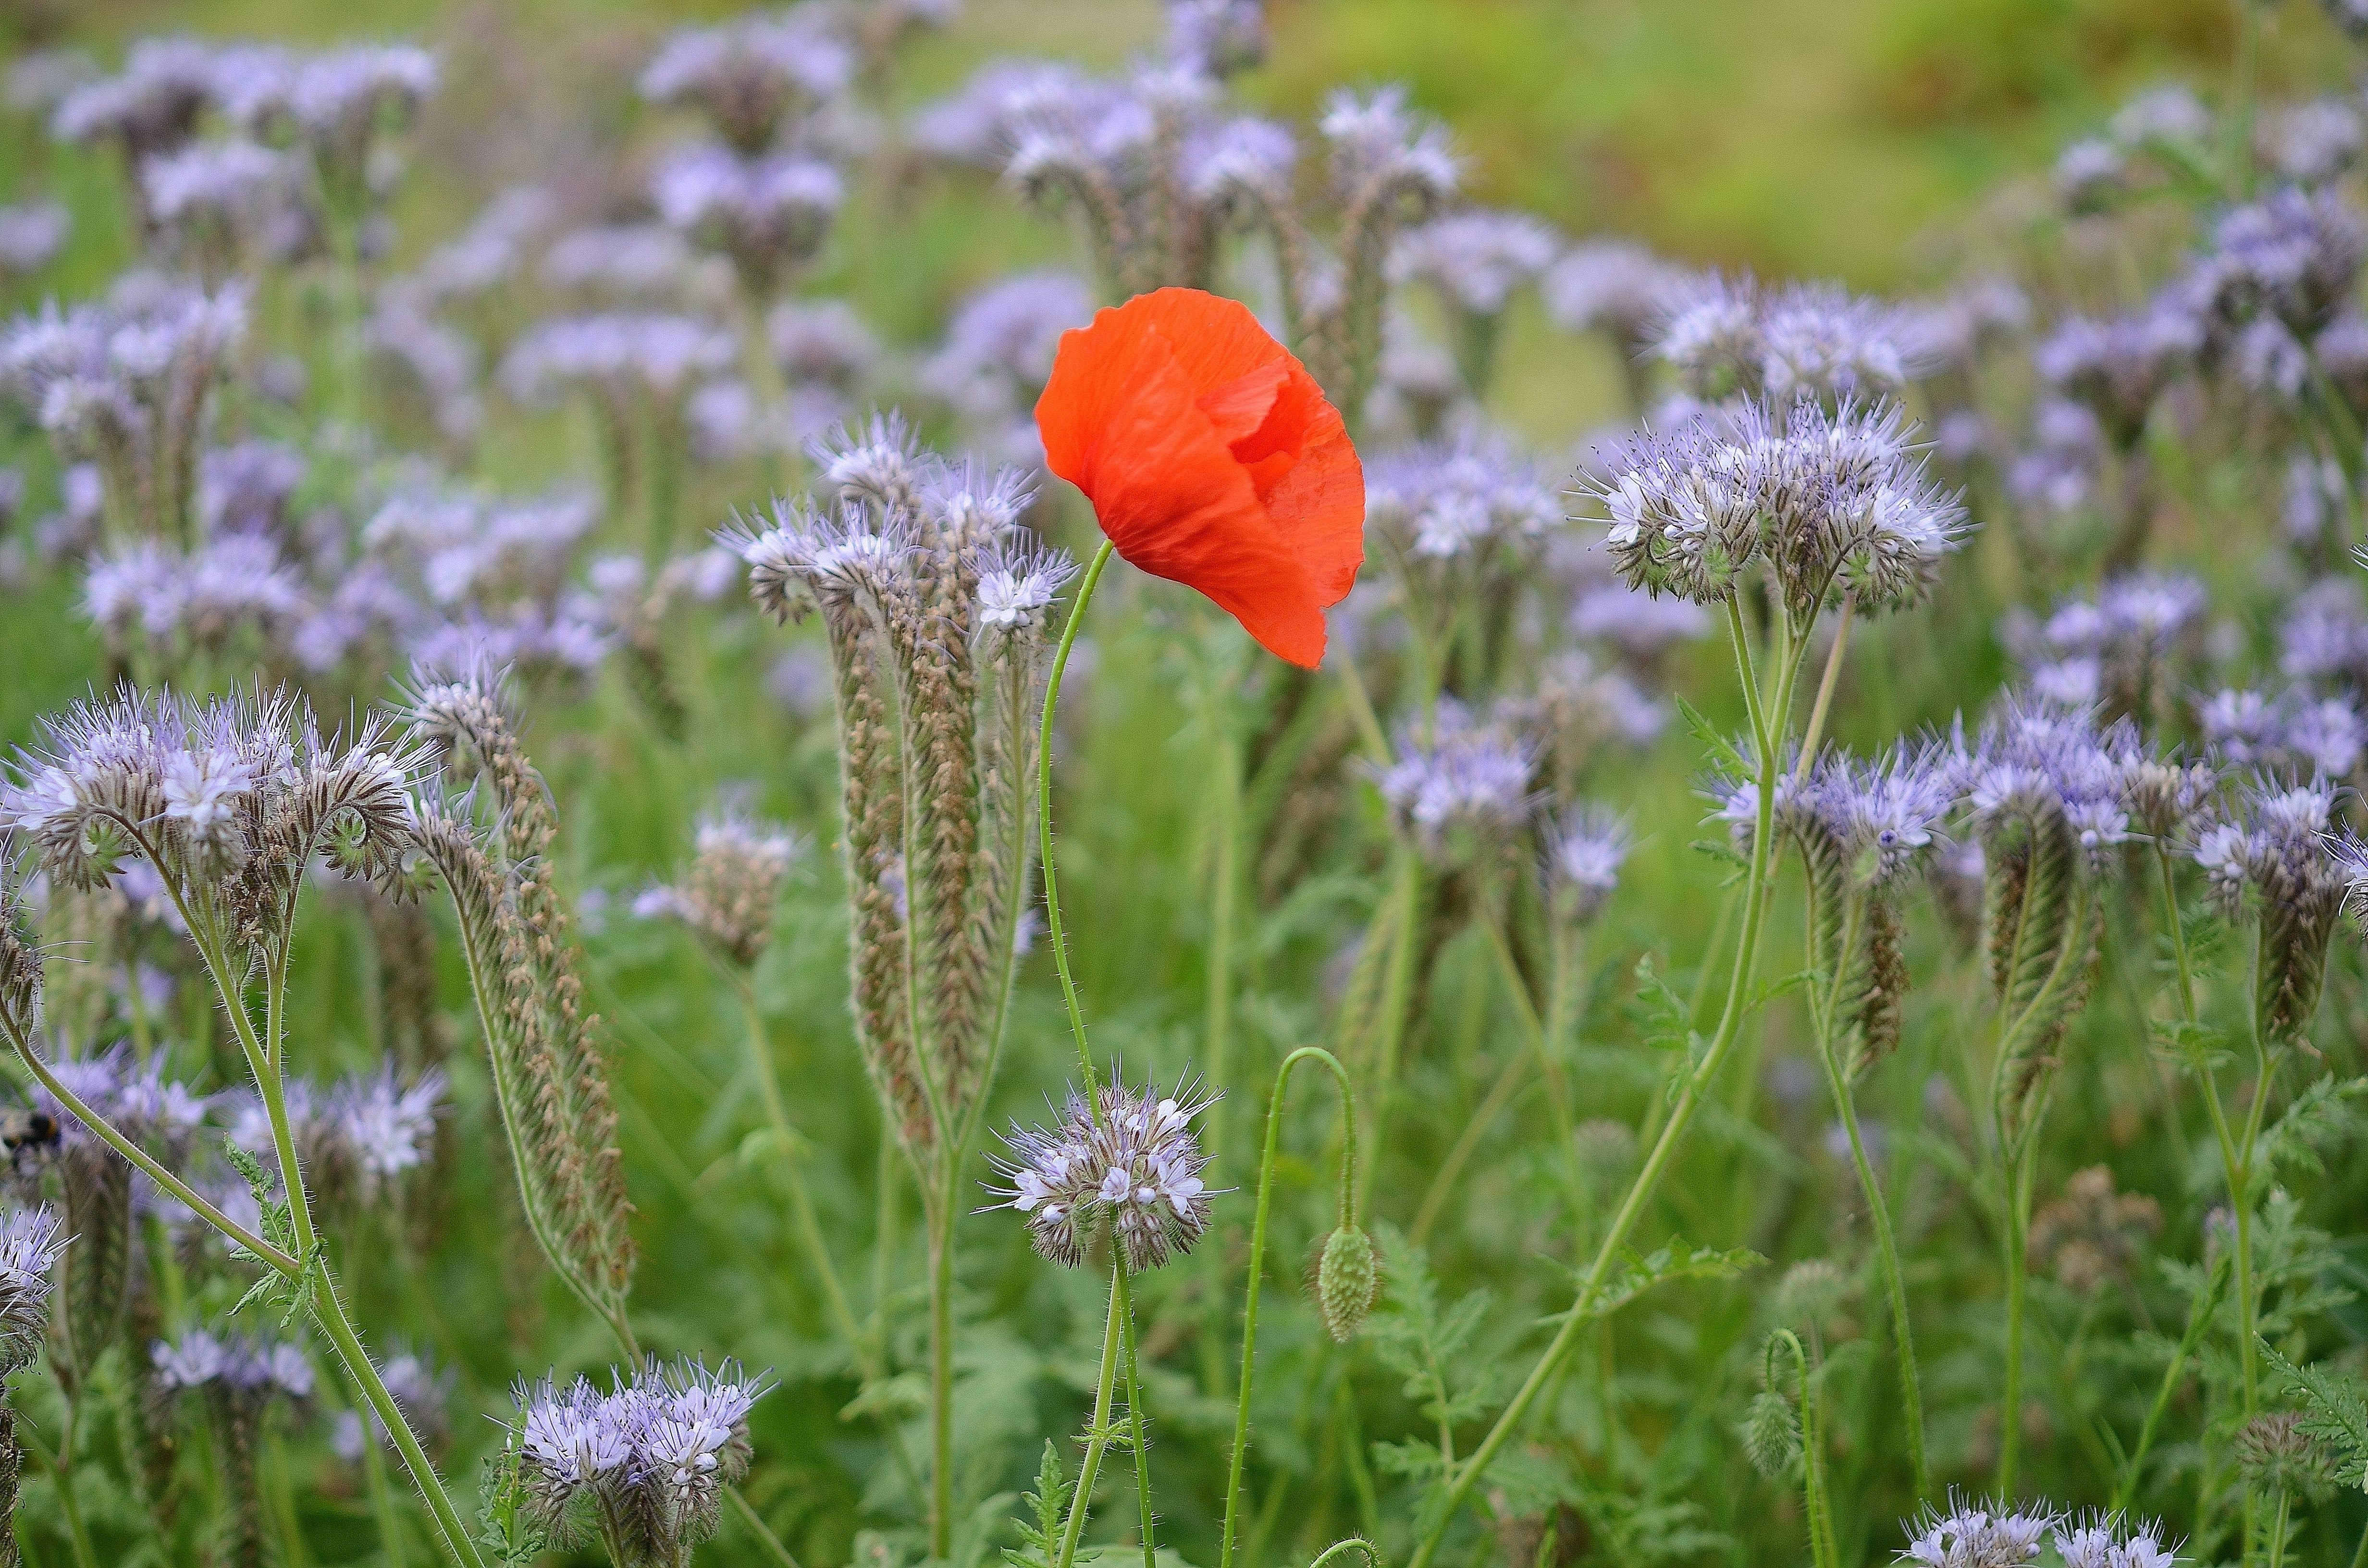 A red flower in a meadow among the lavenders.